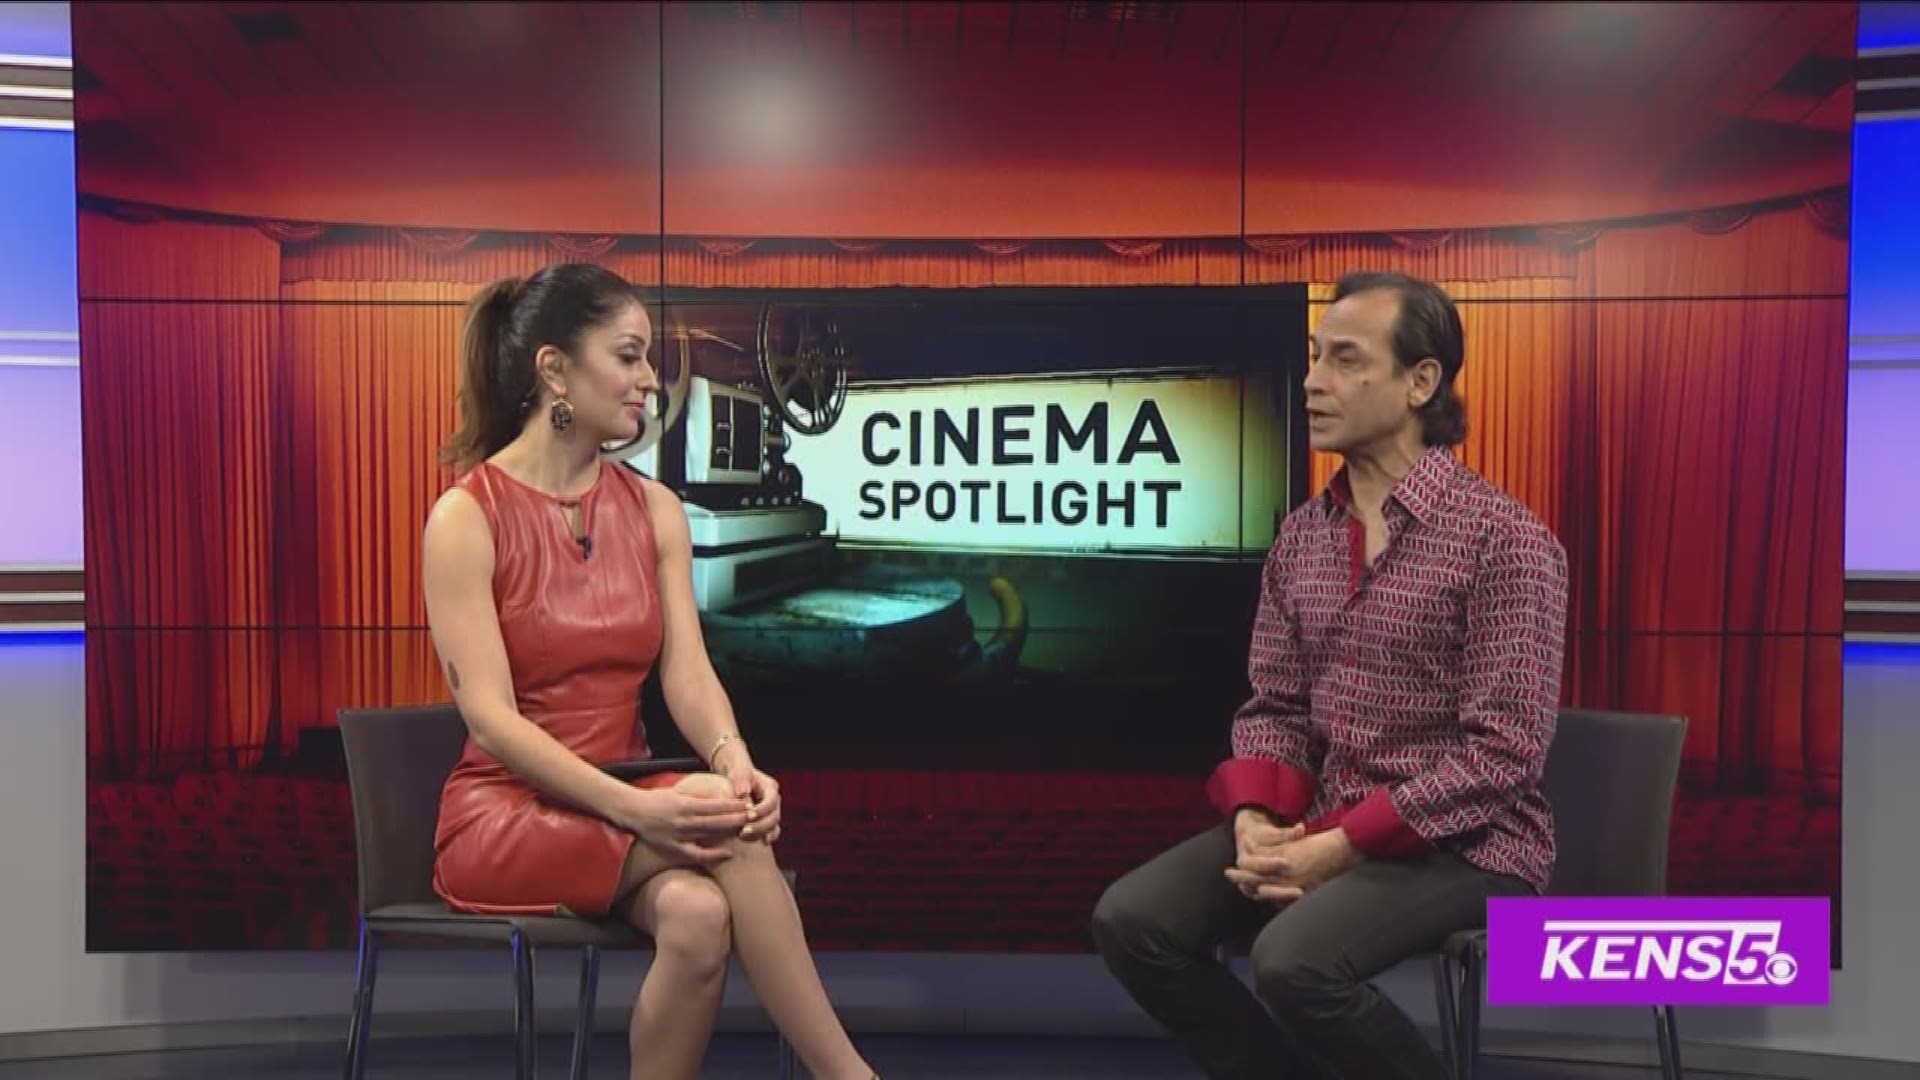 Jesse Borego talks about his latest film debut